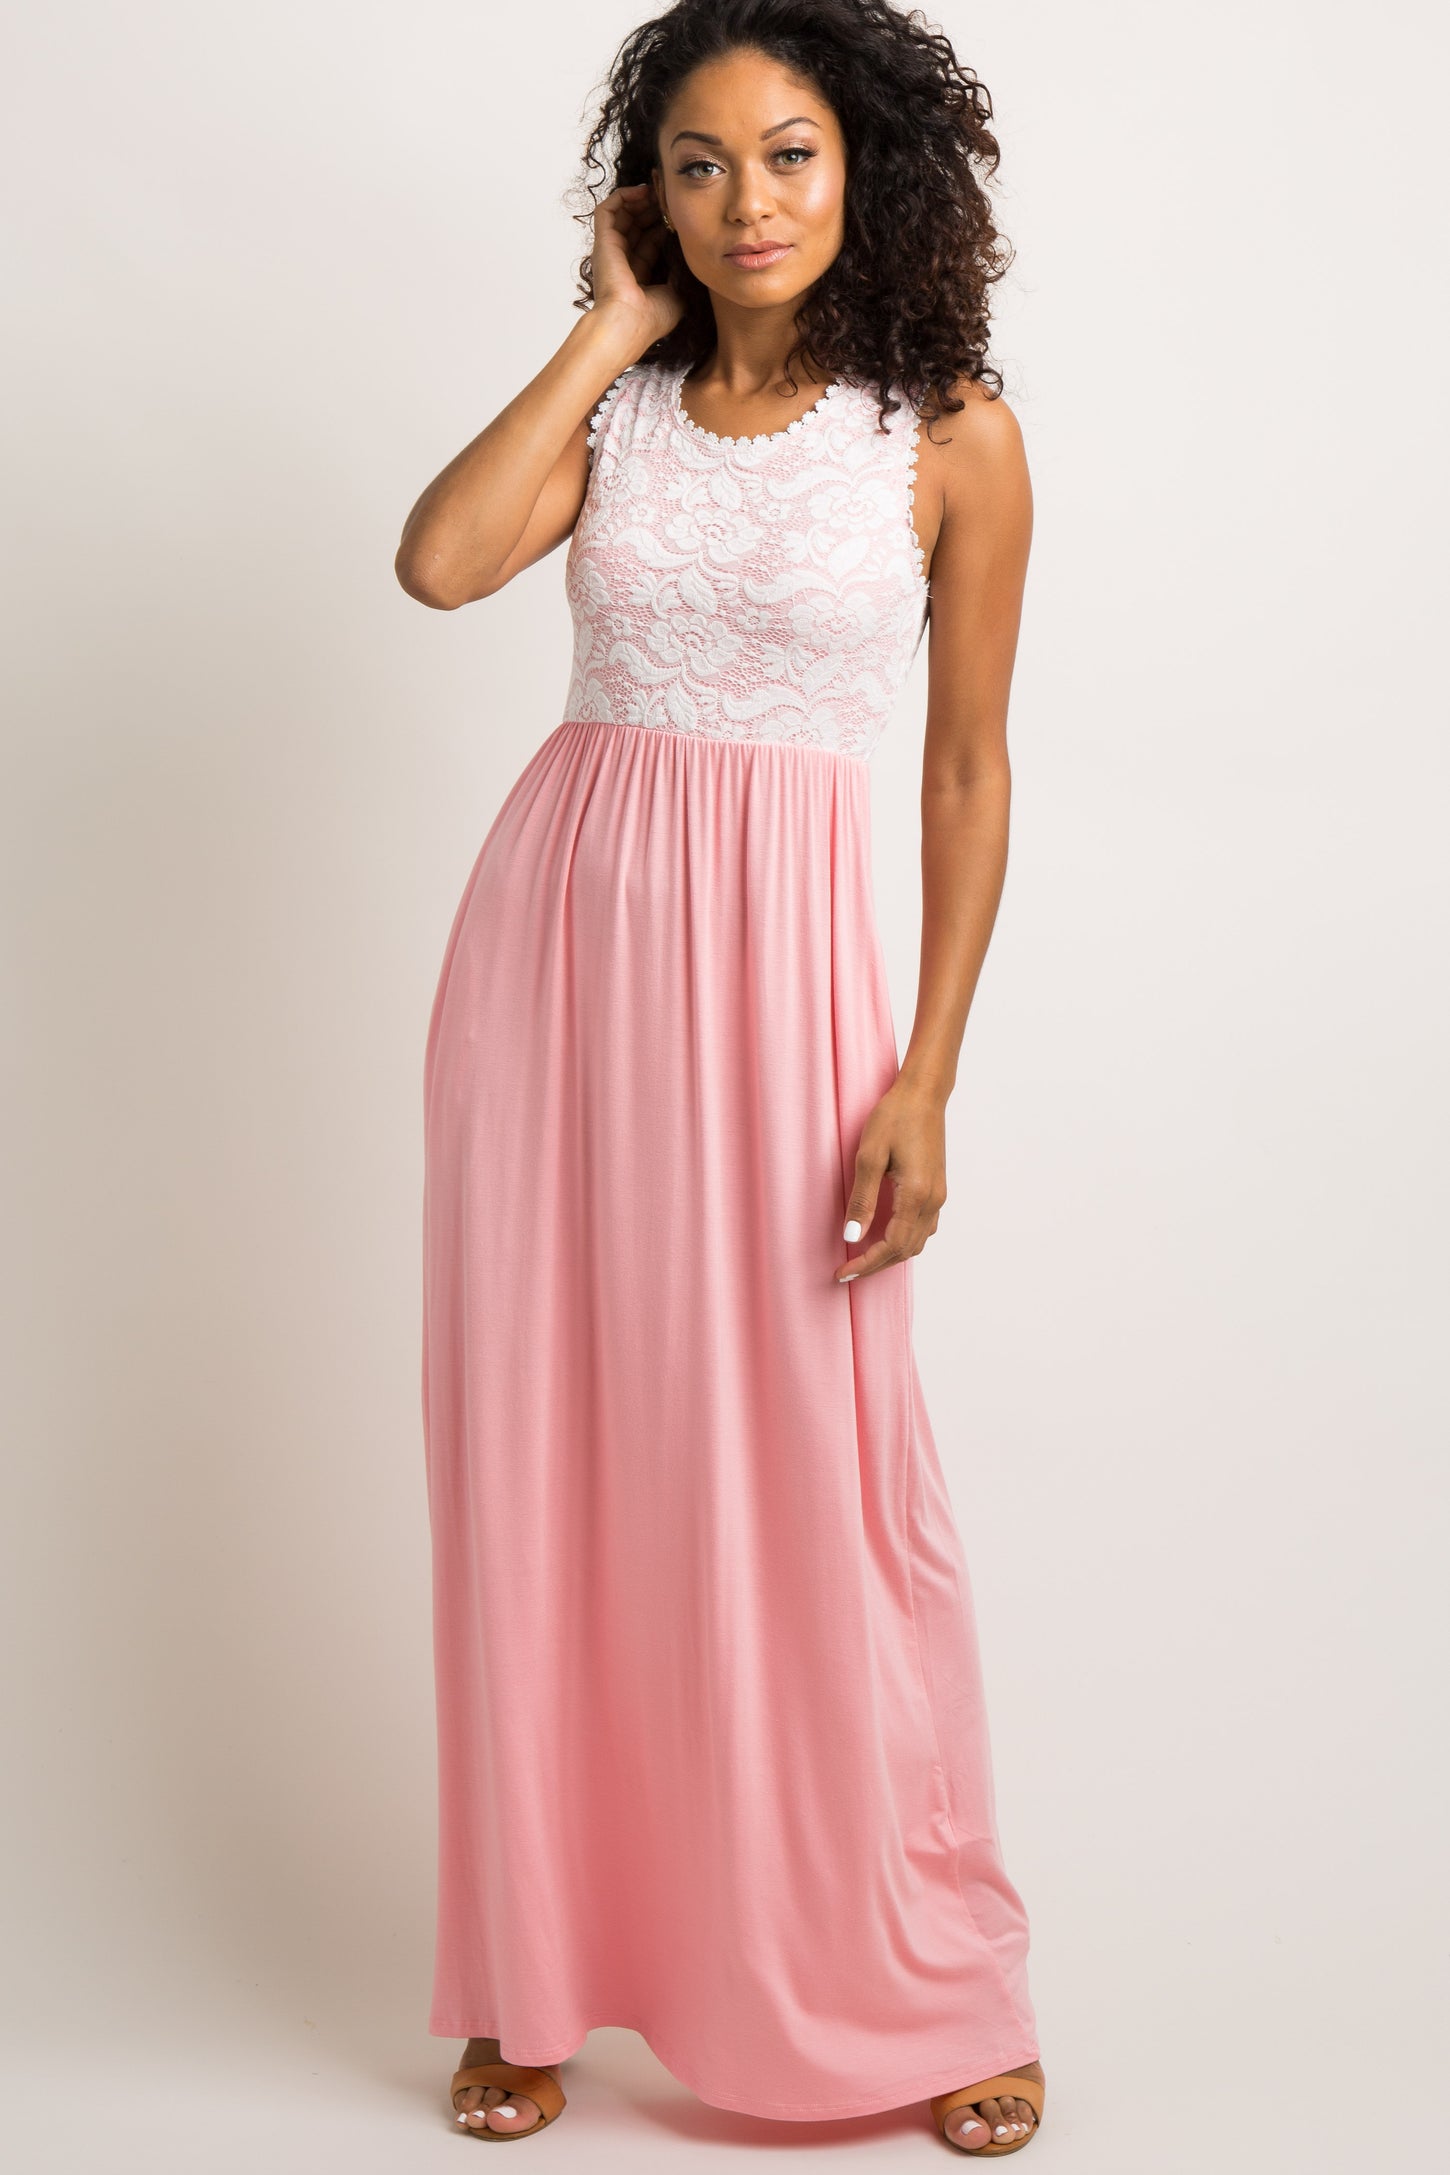 PinkBlush Light Coral Lace Overlay Top Maxi Dress